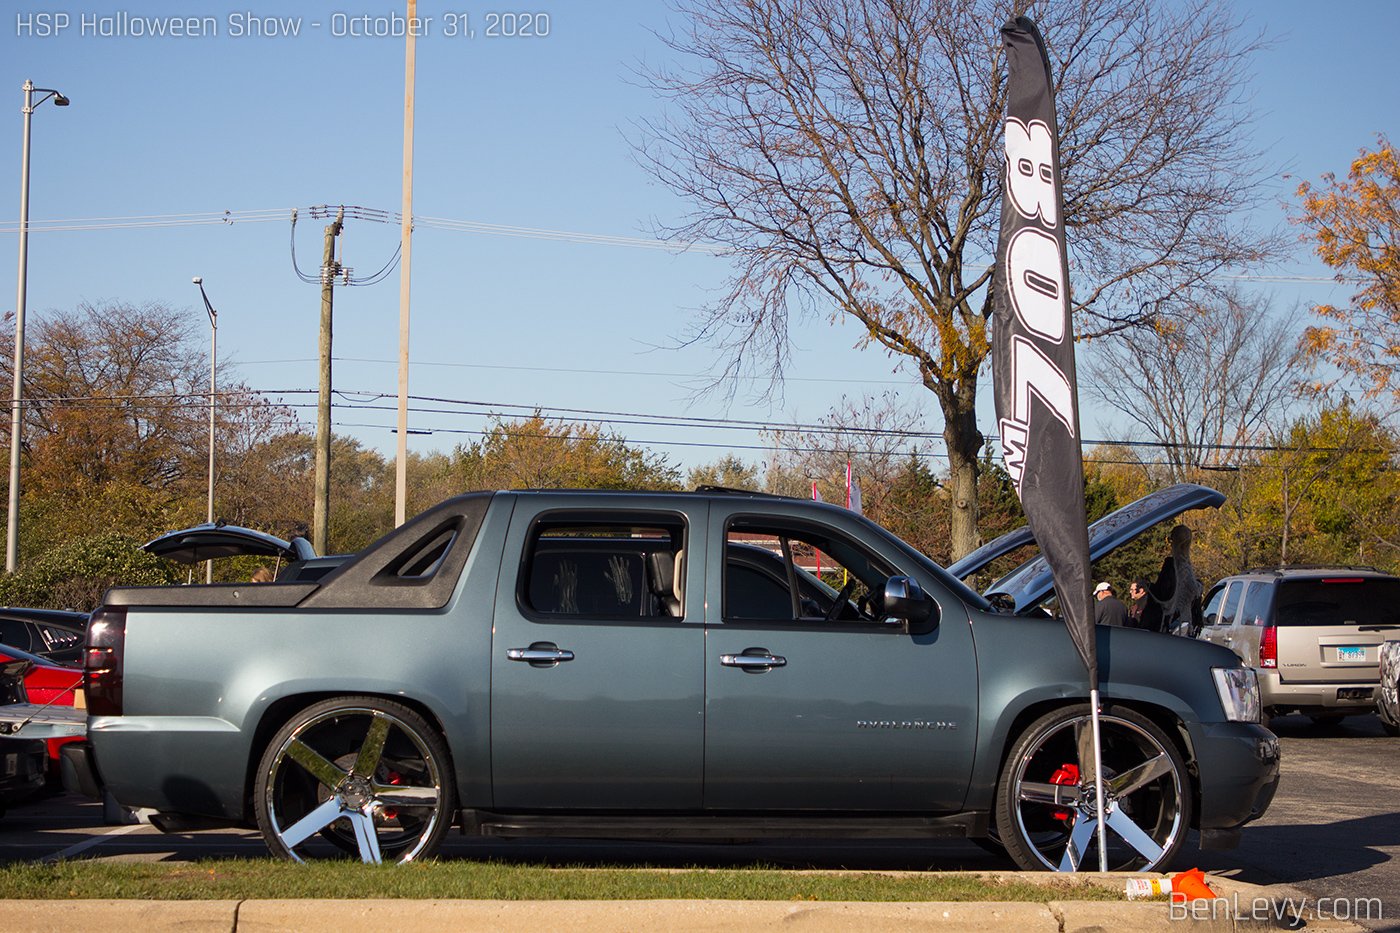 Chevy Avalanche with Team 708